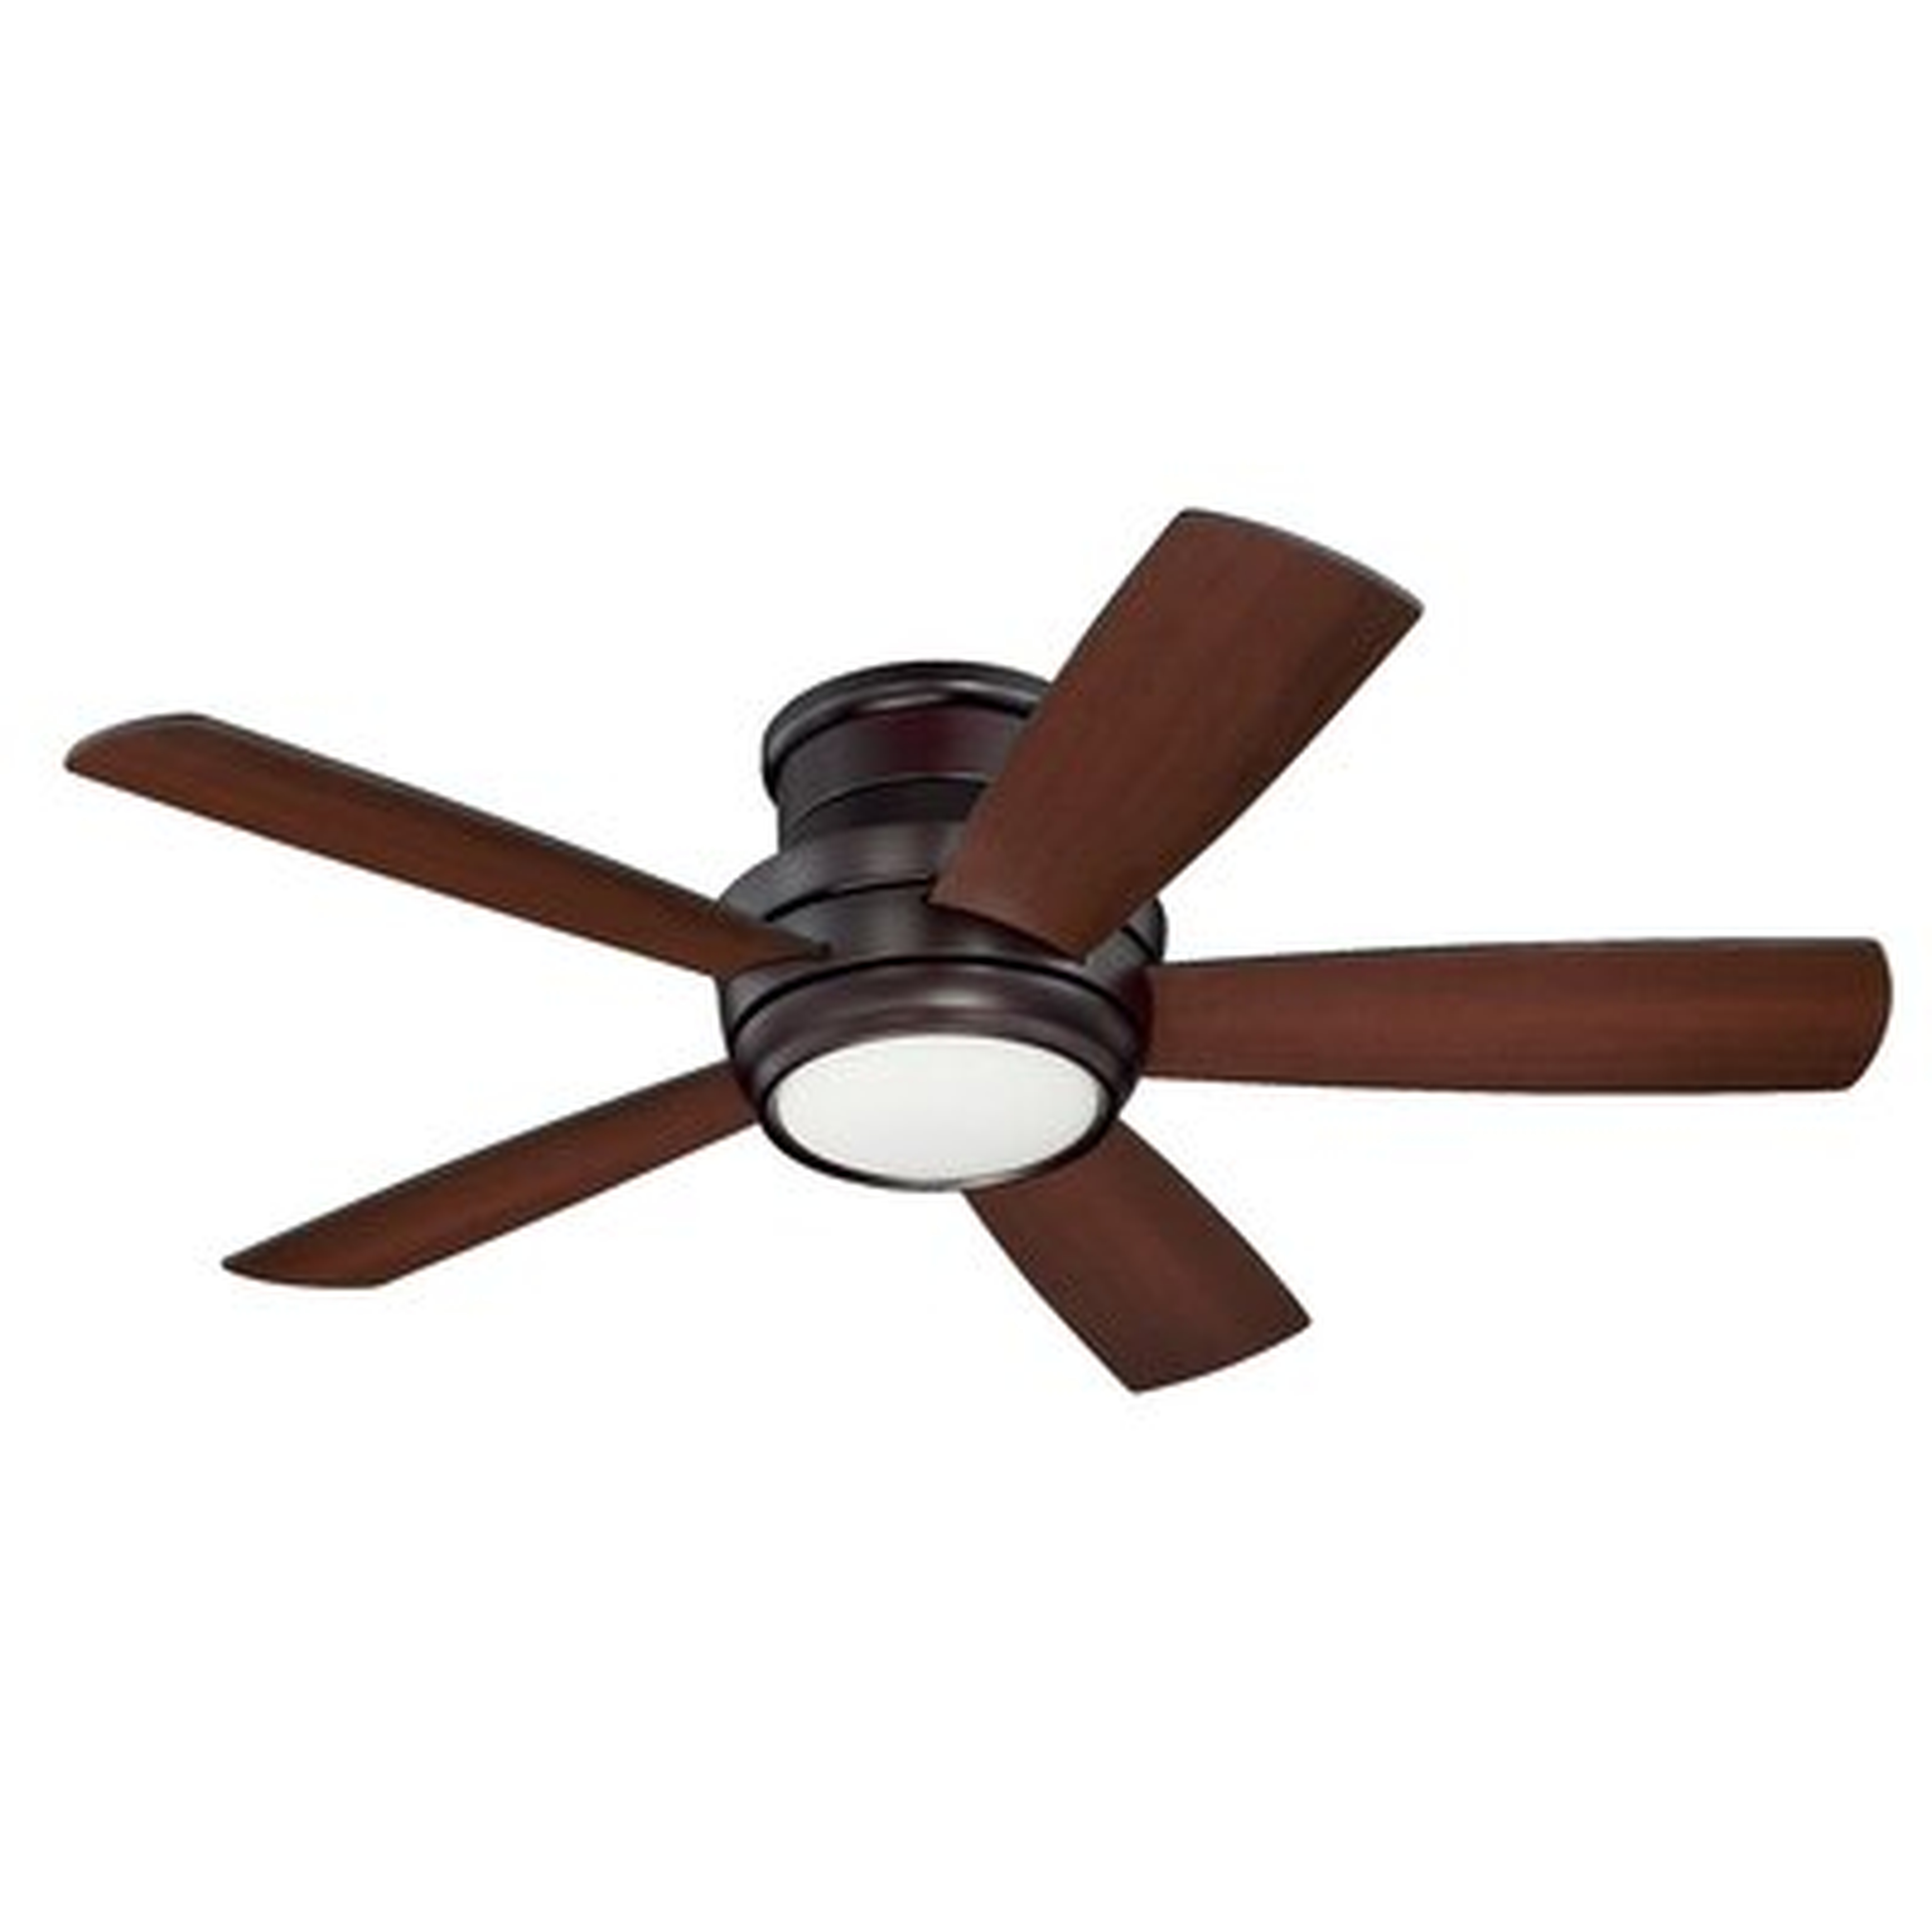 44" Jaron 5 -Blade Outdoor LED Standard Ceiling Fan with Remote Control and Light Kit Included - AllModern